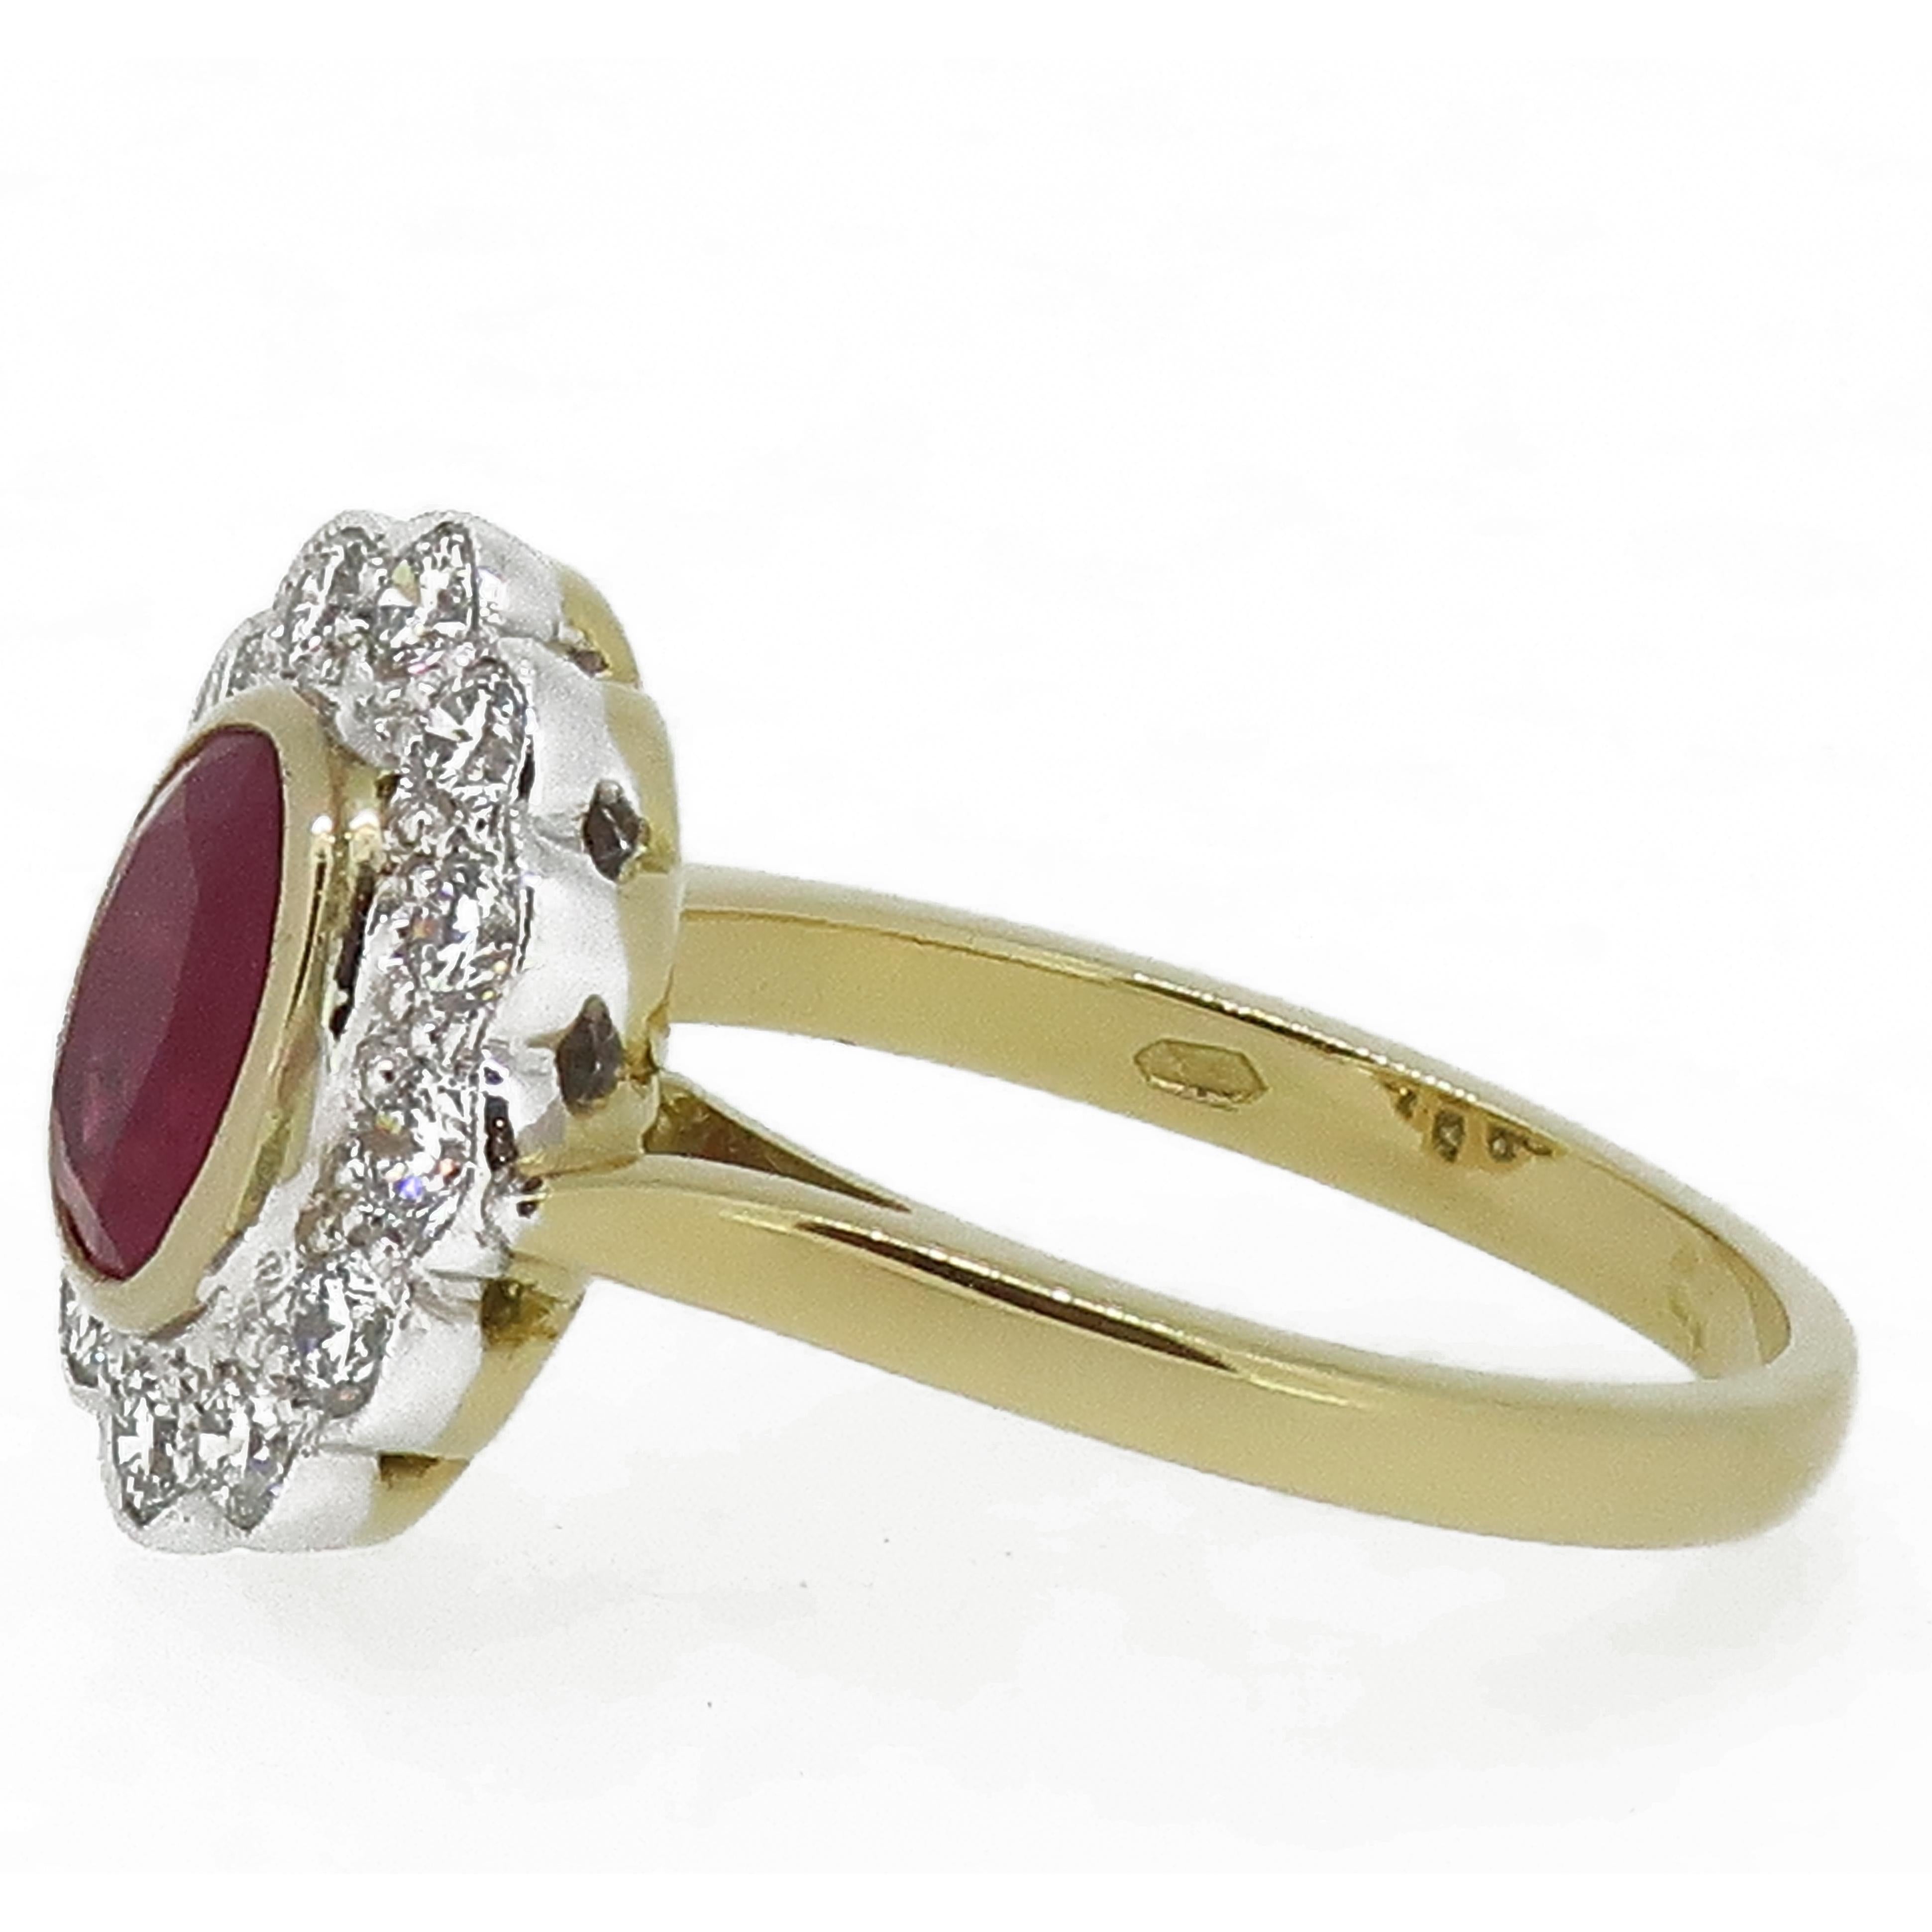 18 Karat Gold Oval Ruby & Diamond Art Deco Style Cluster Ring.

A classic ruby red oval ruby ring. The ruby is set off beautifully in a smooth yellow gold bezel, surrounded by twelve white brilliant cut diamonds in a fine white gold mill-grain